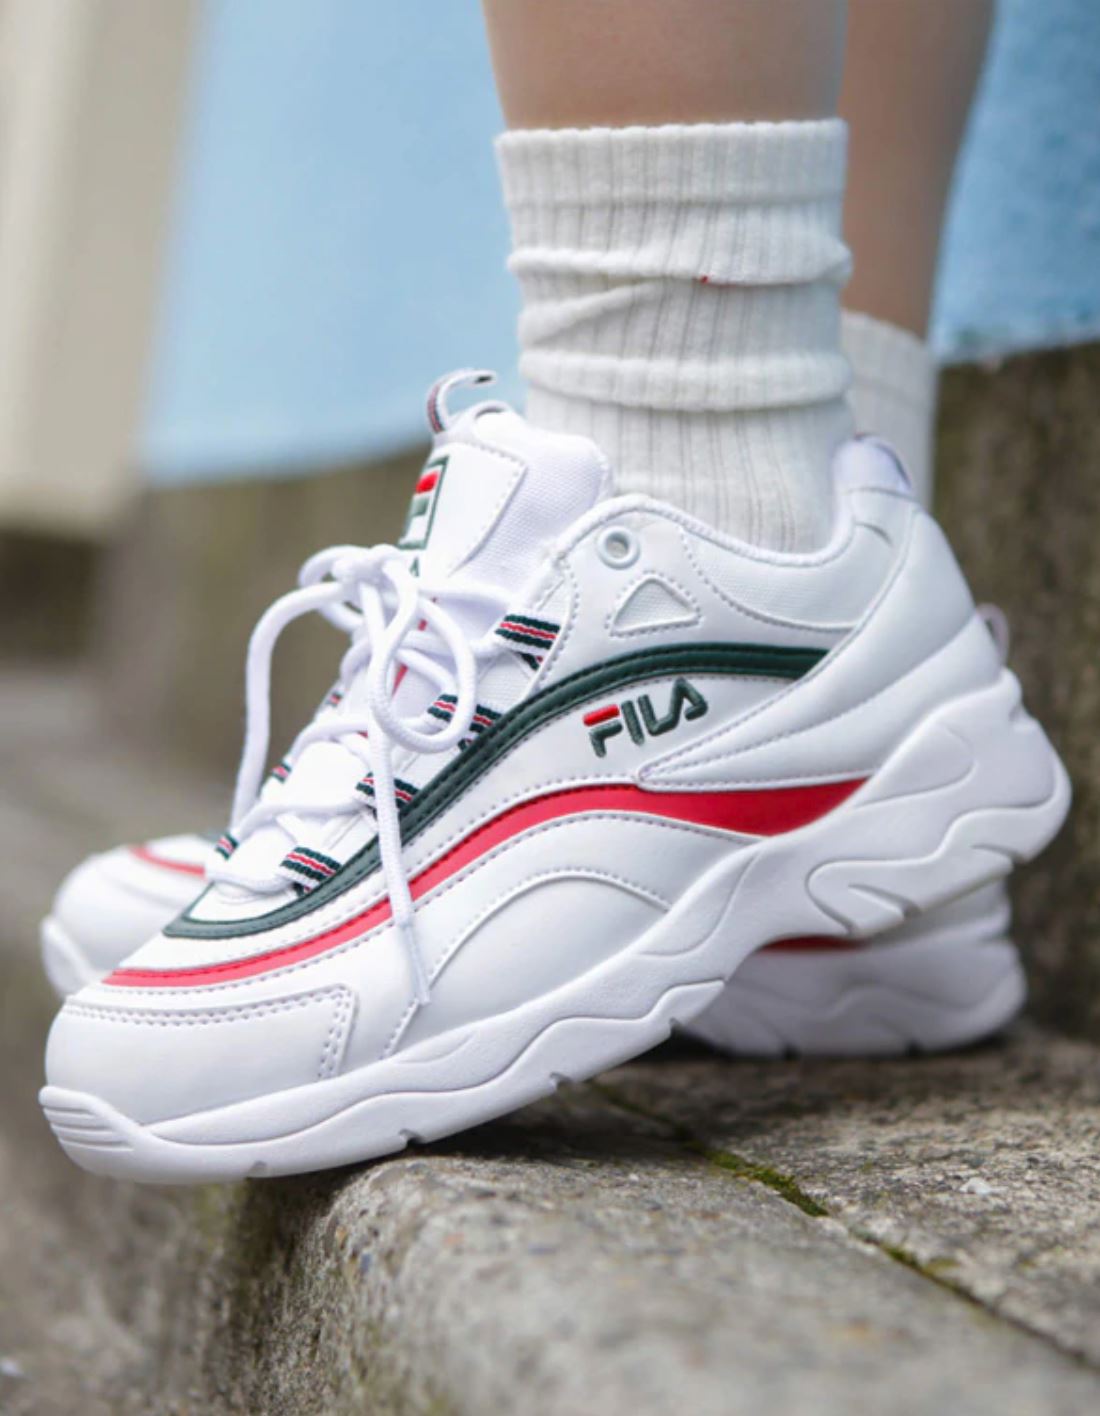 FILA RAY WH SYCA FR atmos exclusive-02